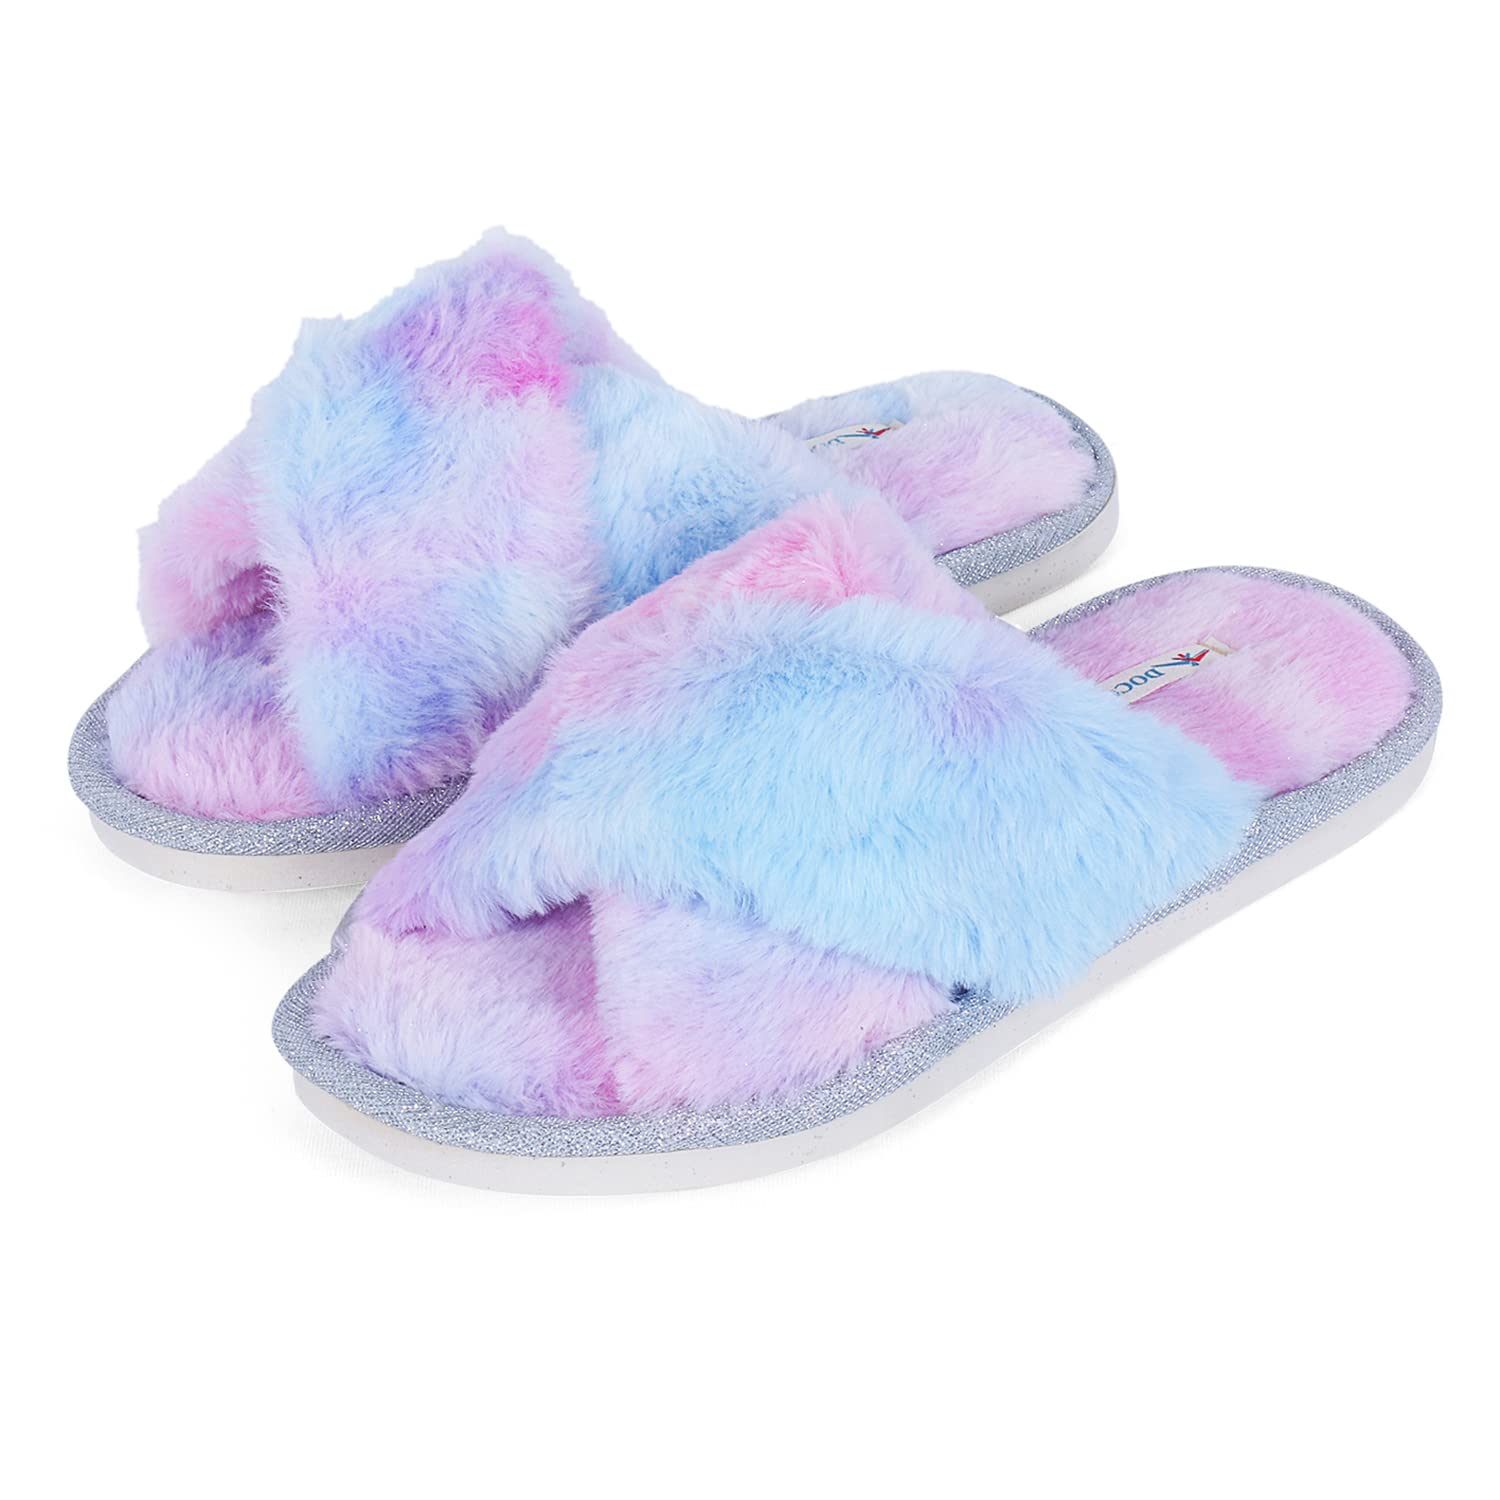 plush-slippers-mothers-day-gifts